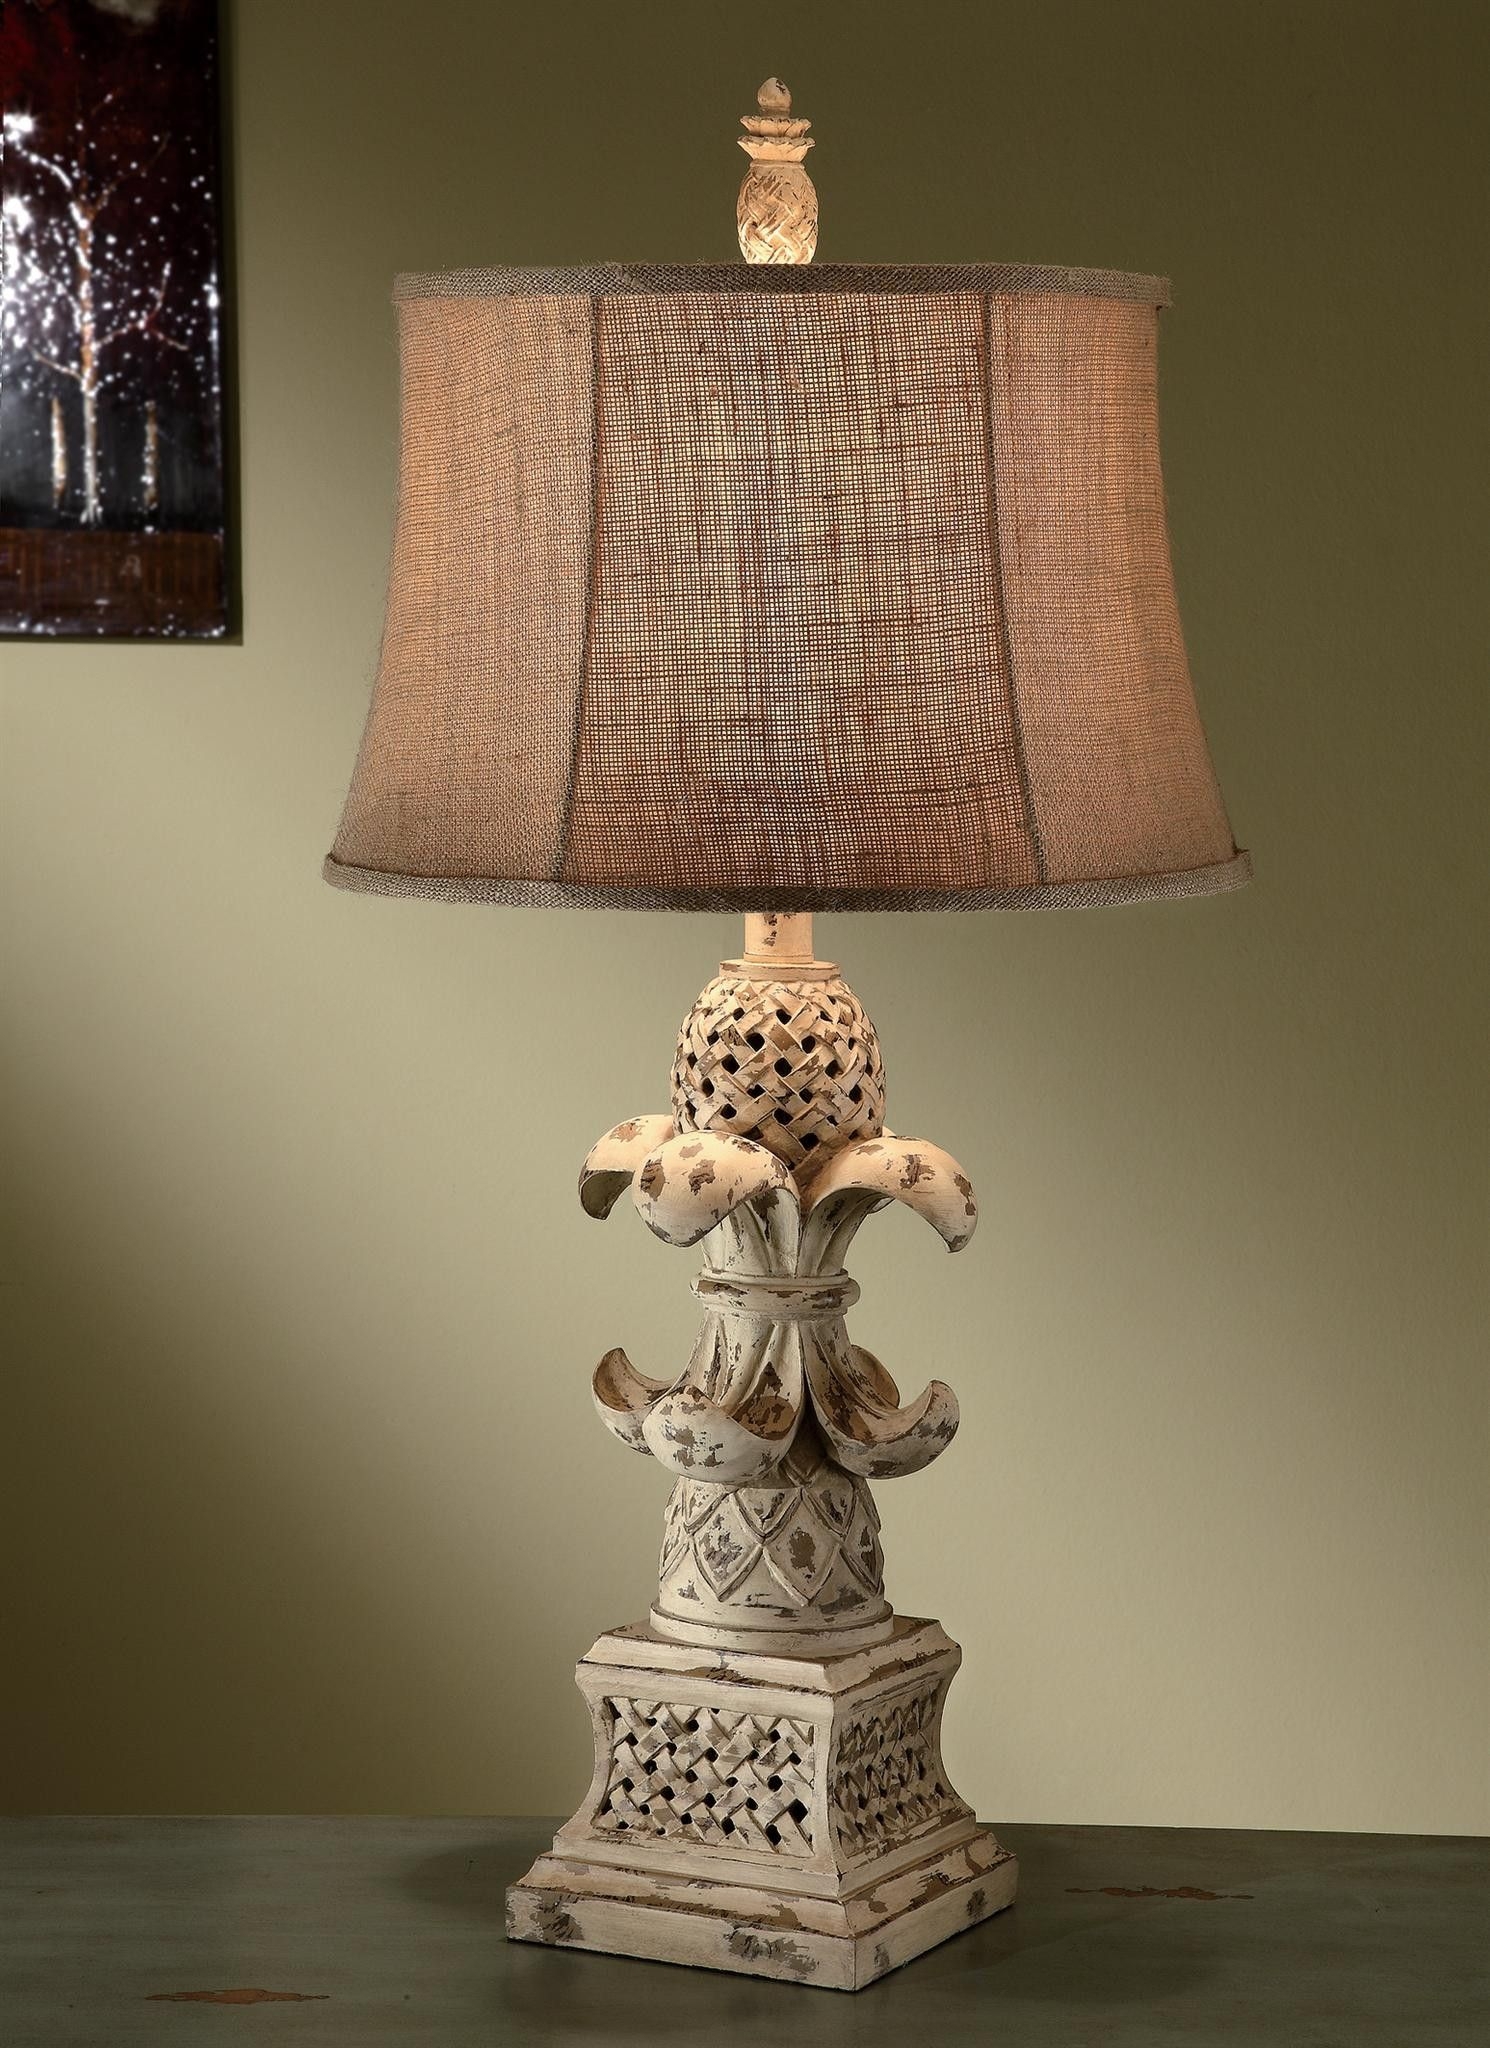 French Country Fleur De Lis Table Lamp Burlap Shade Shabby Cottage Chic Tuscan